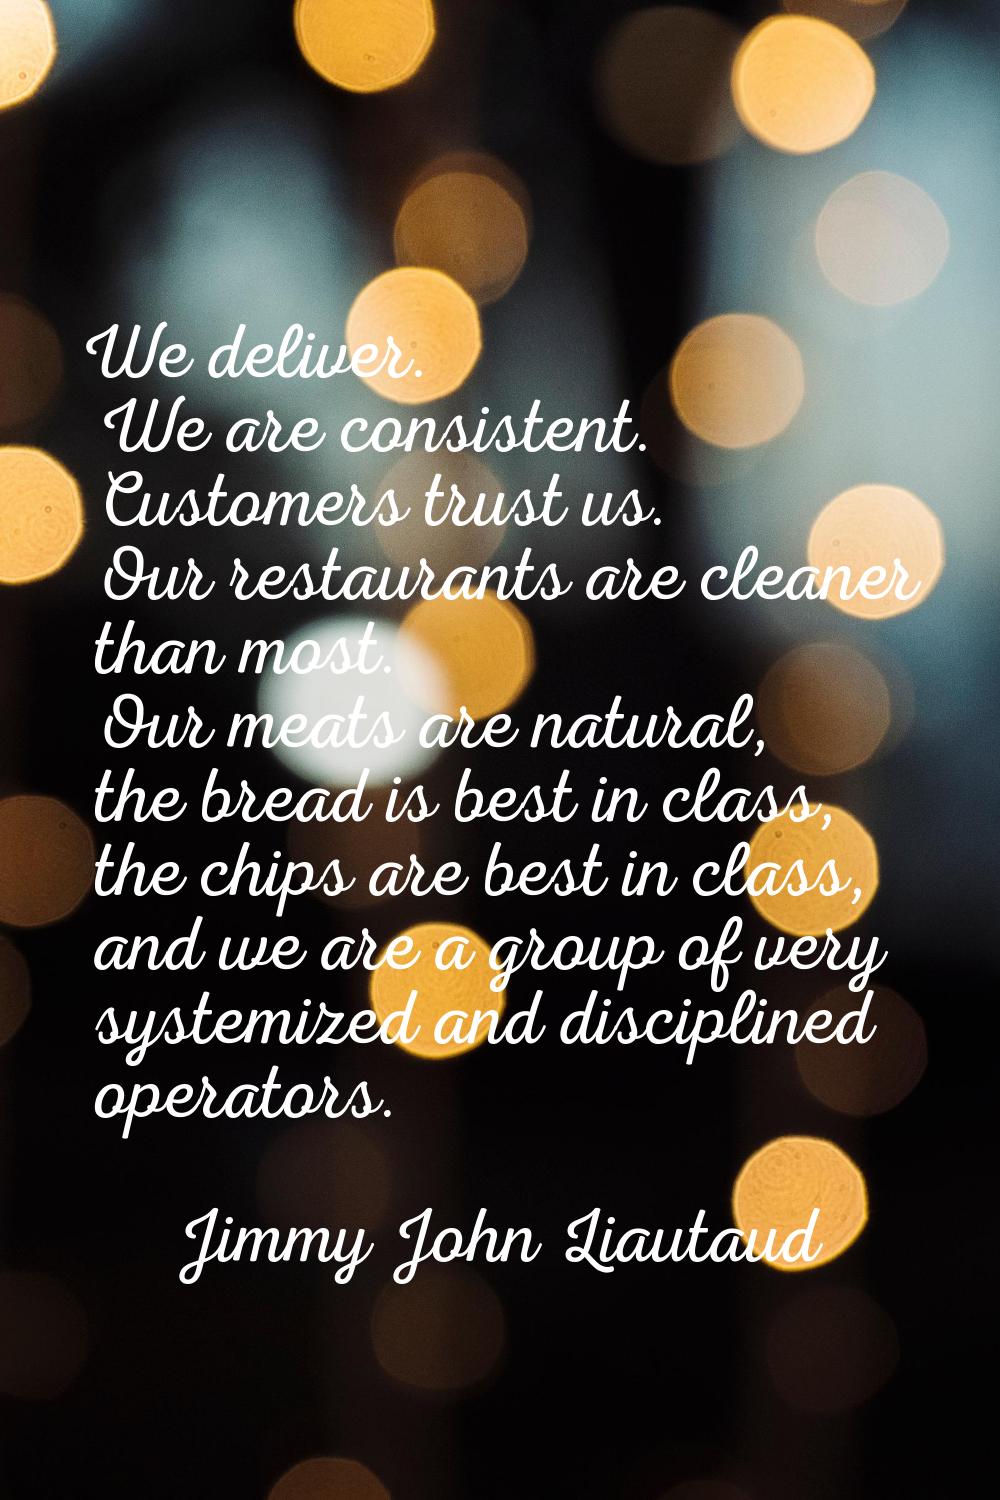 We deliver. We are consistent. Customers trust us. Our restaurants are cleaner than most. Our meats